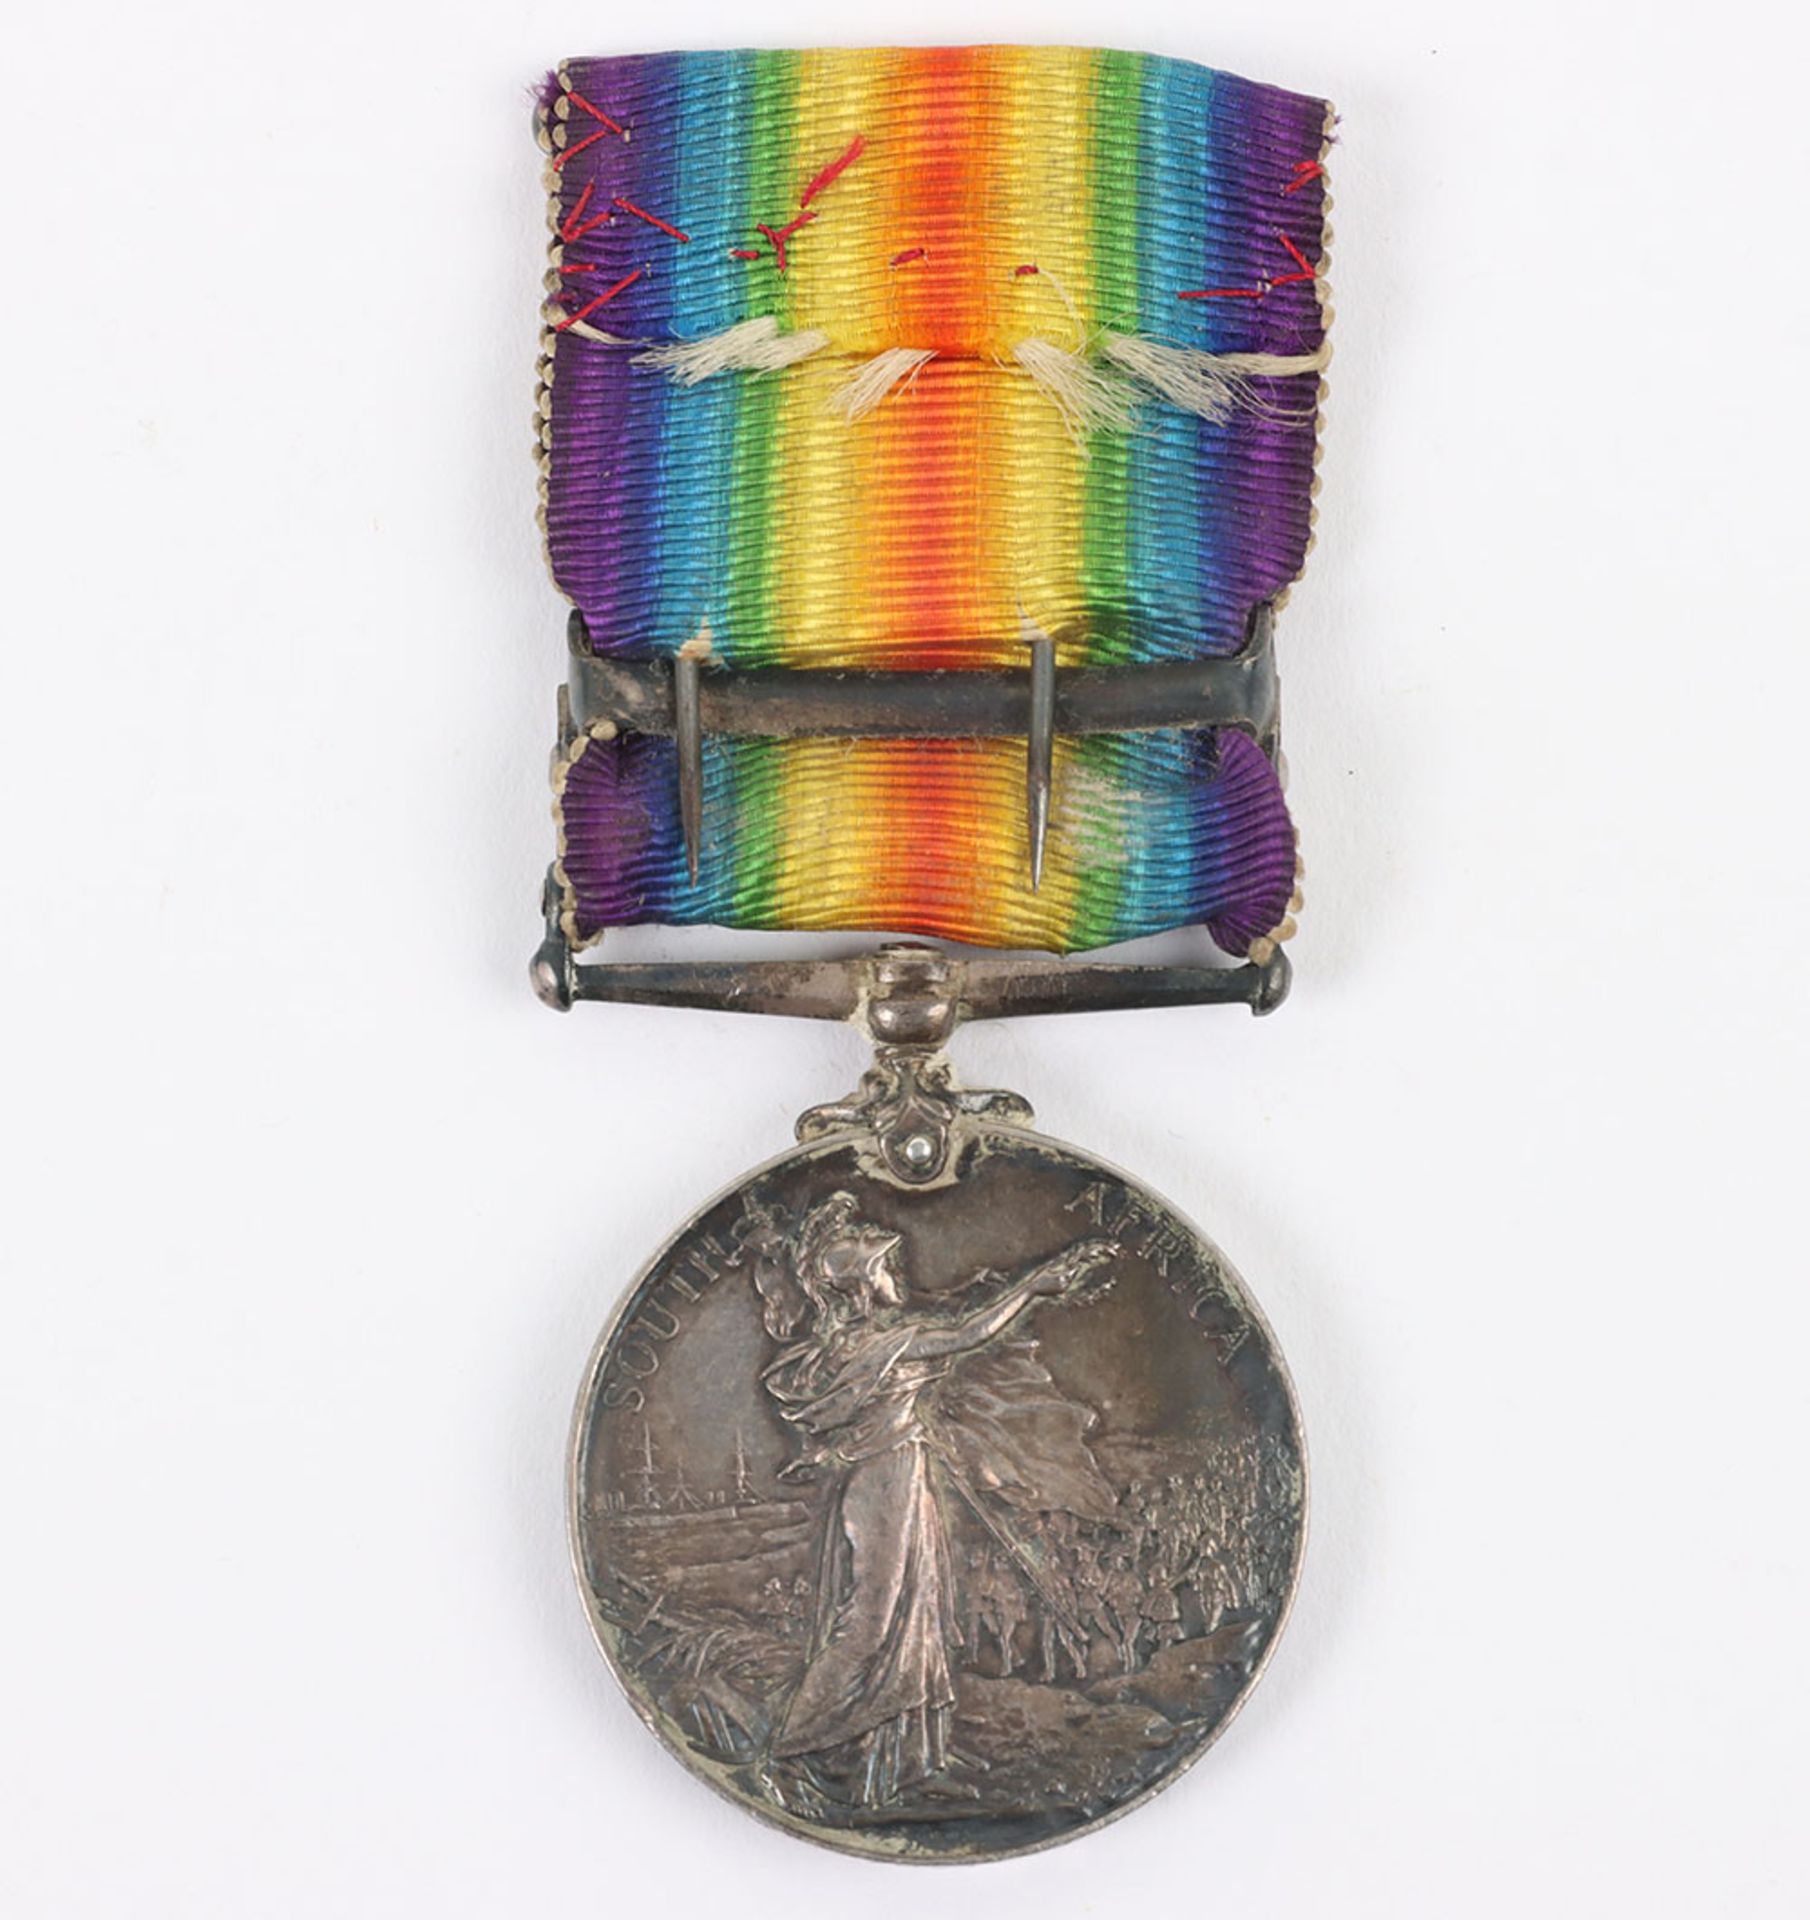 Kings South Africa Medal 2nd Dragoons (Royal Scots Greys) - Image 5 of 6